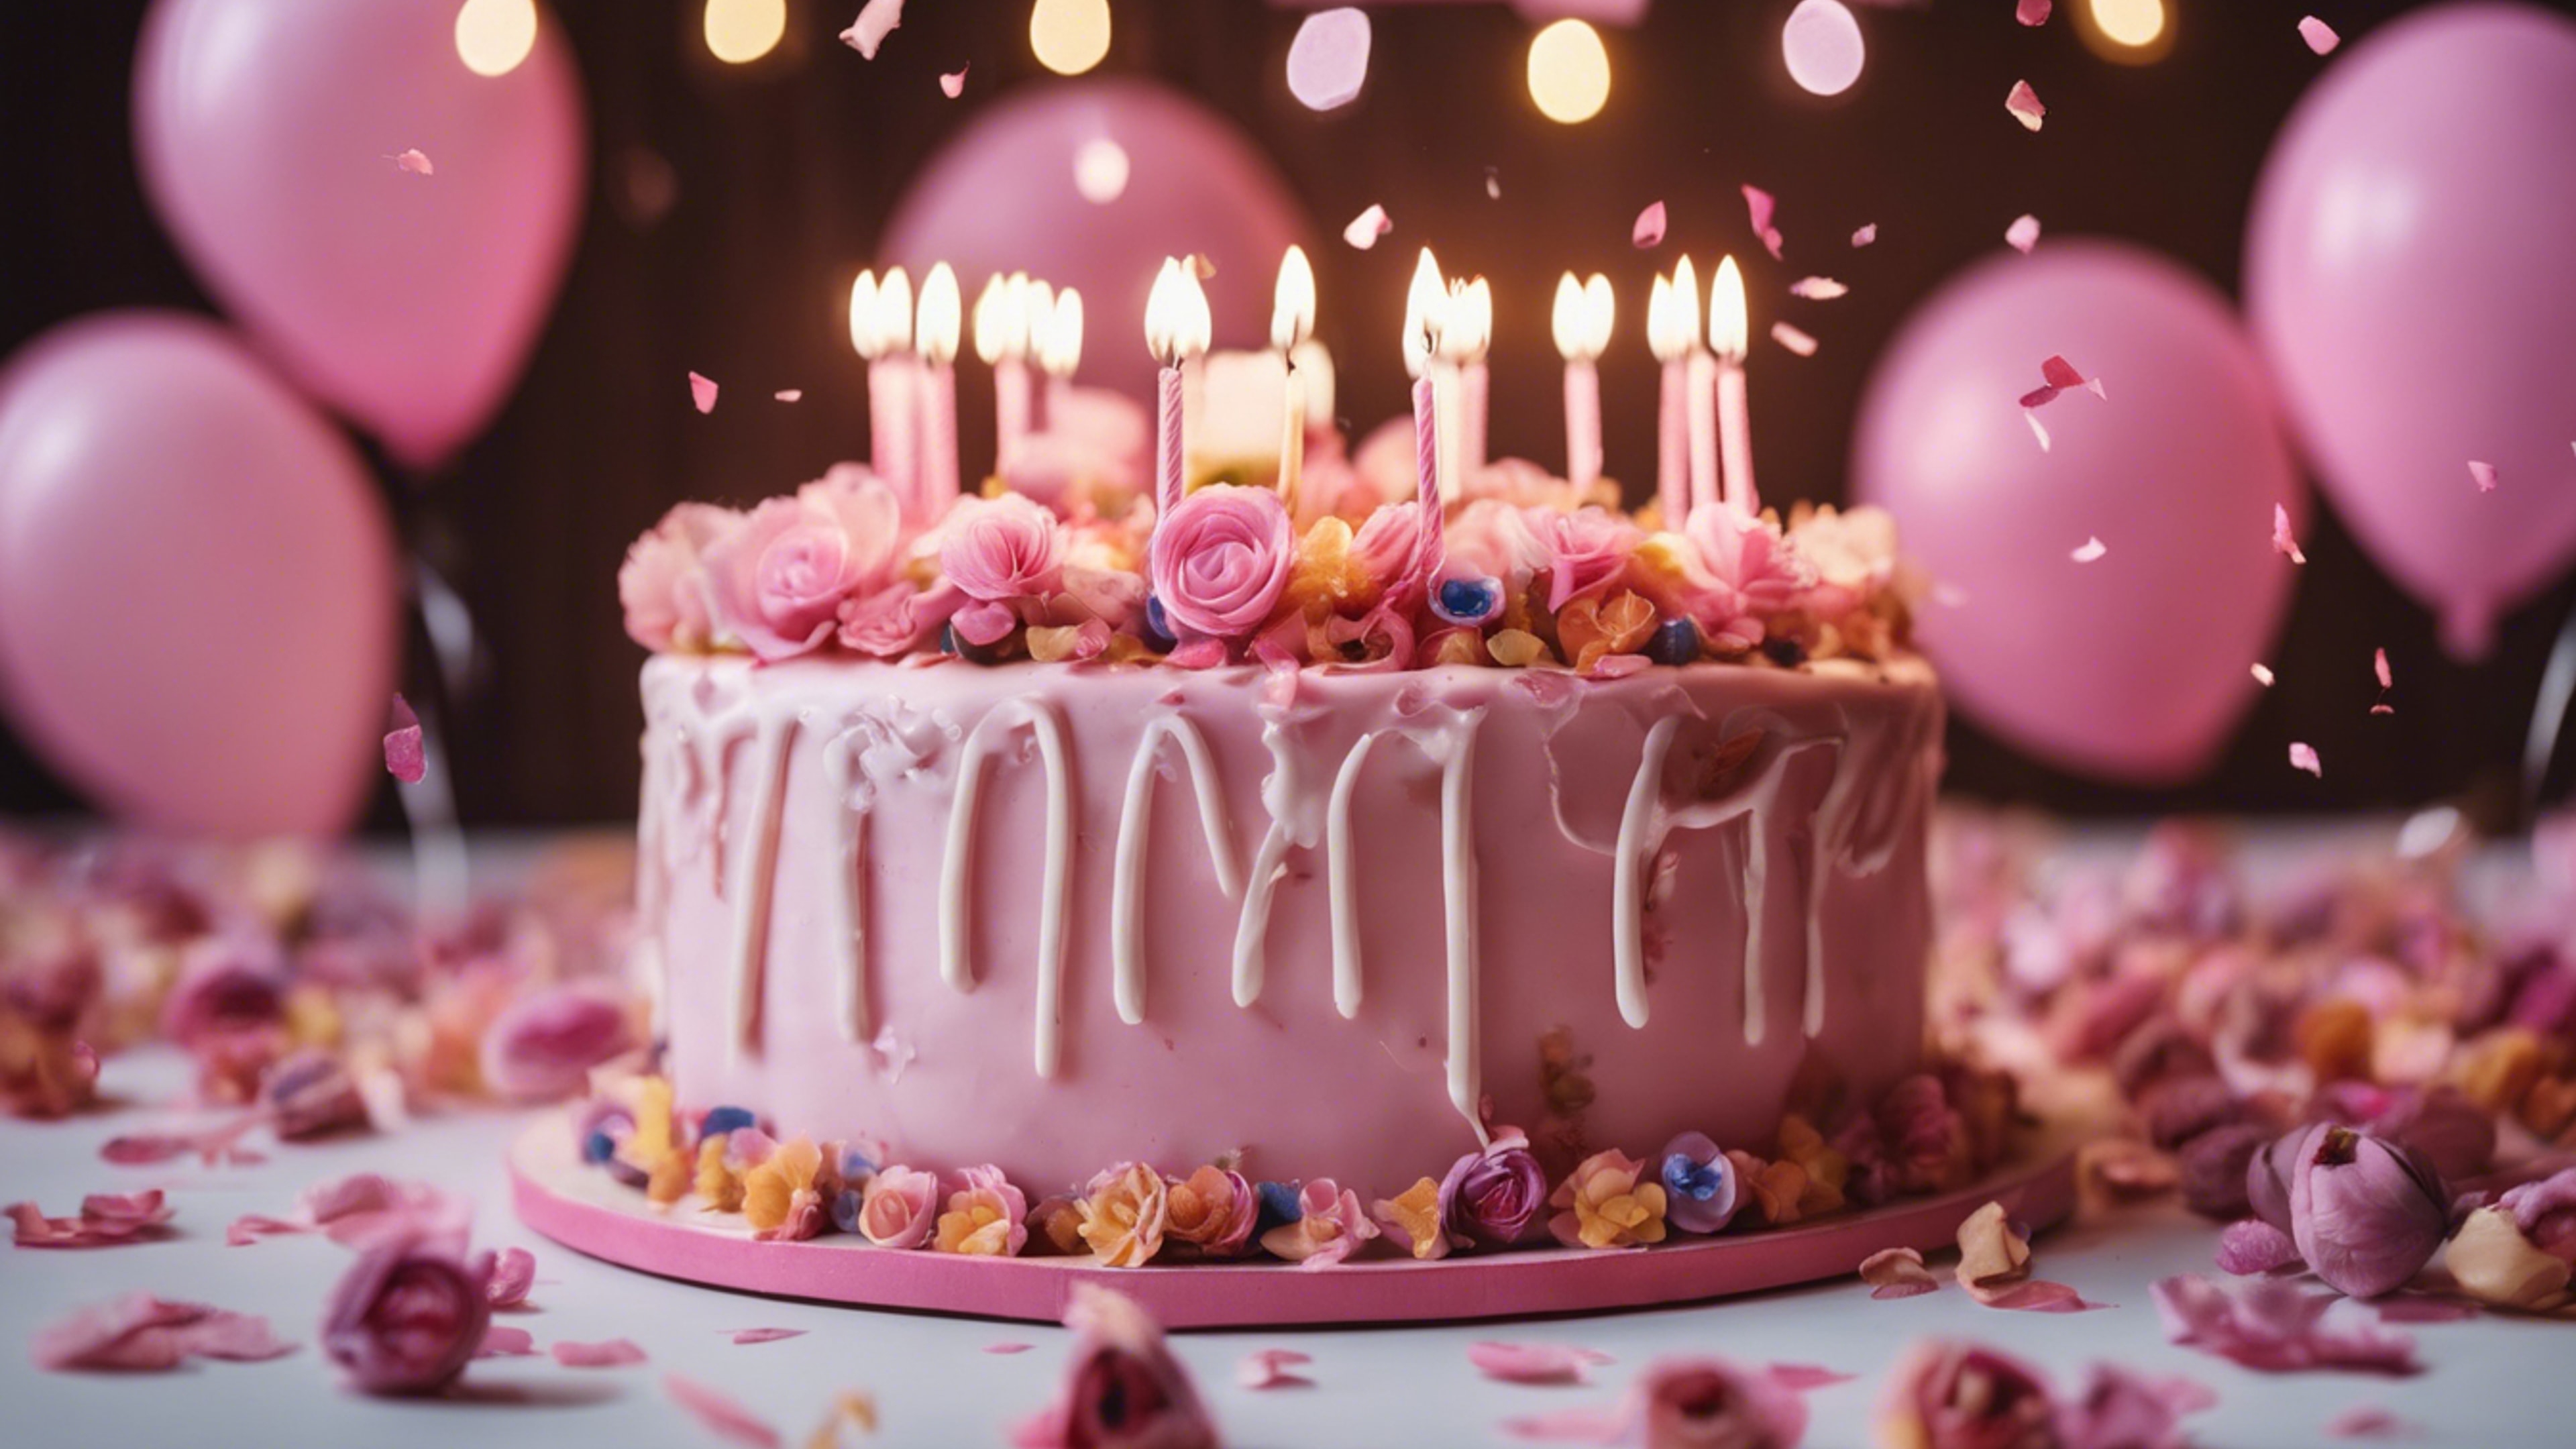 A girly birthday party with pink balloons, confetti, and a big cake decorated with edible flowers. Wallpaper[43e1da28e36740768483]